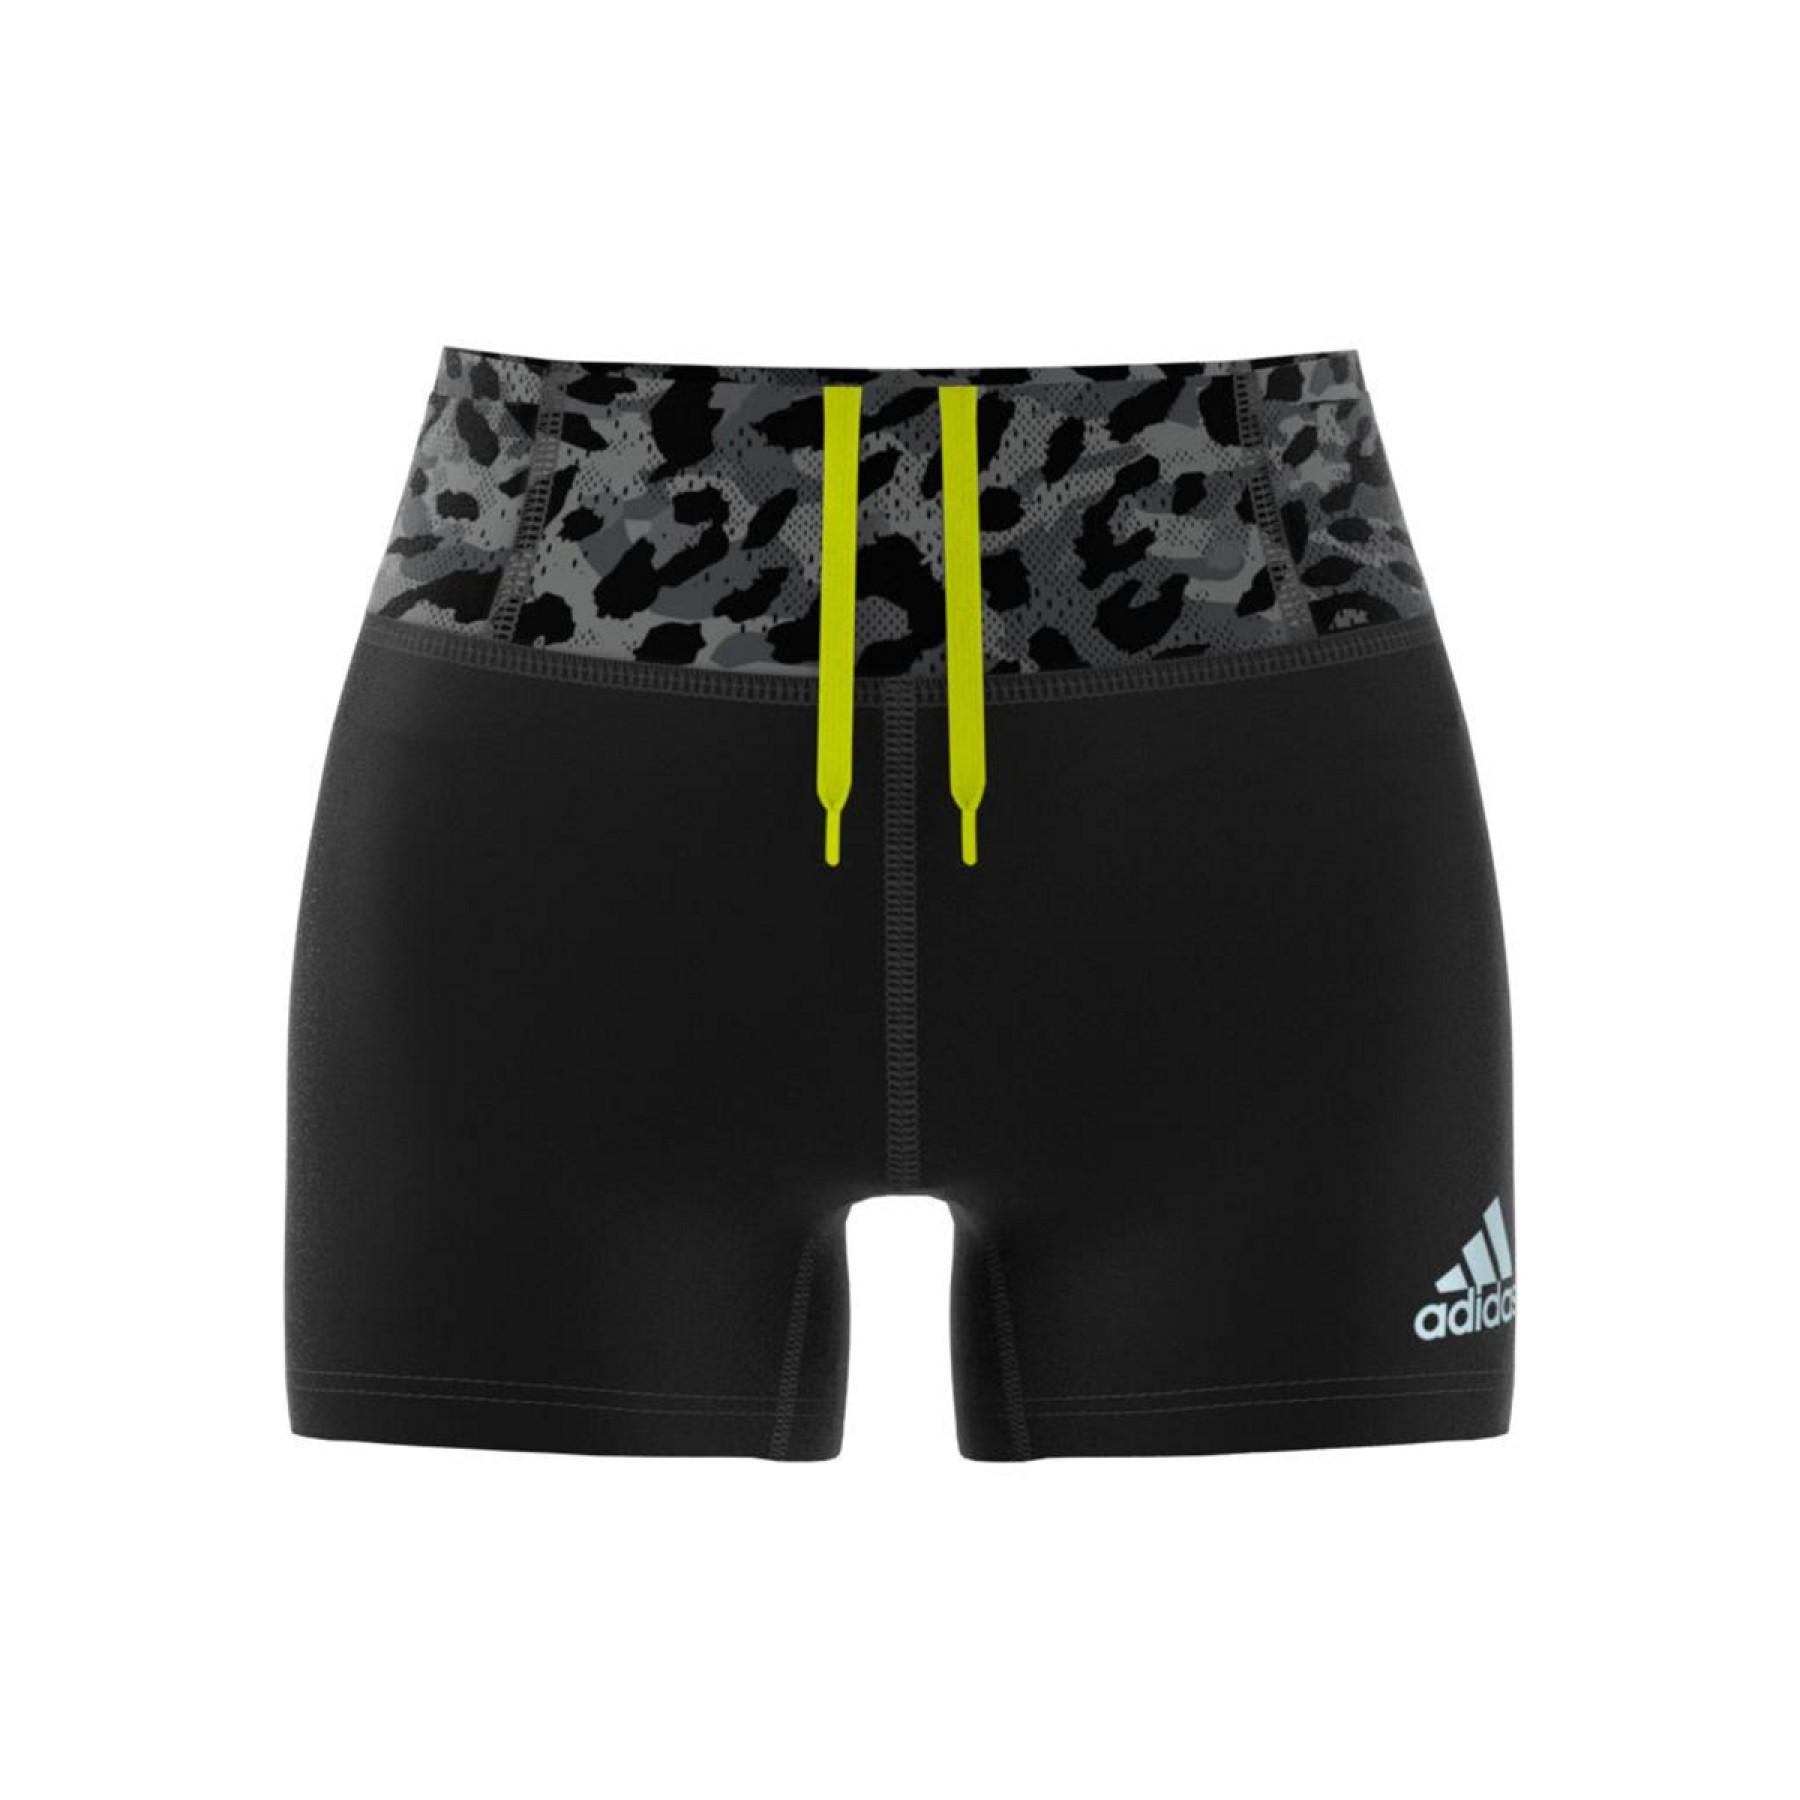 Short femme adidas Fast Primeblue Graphic Booty